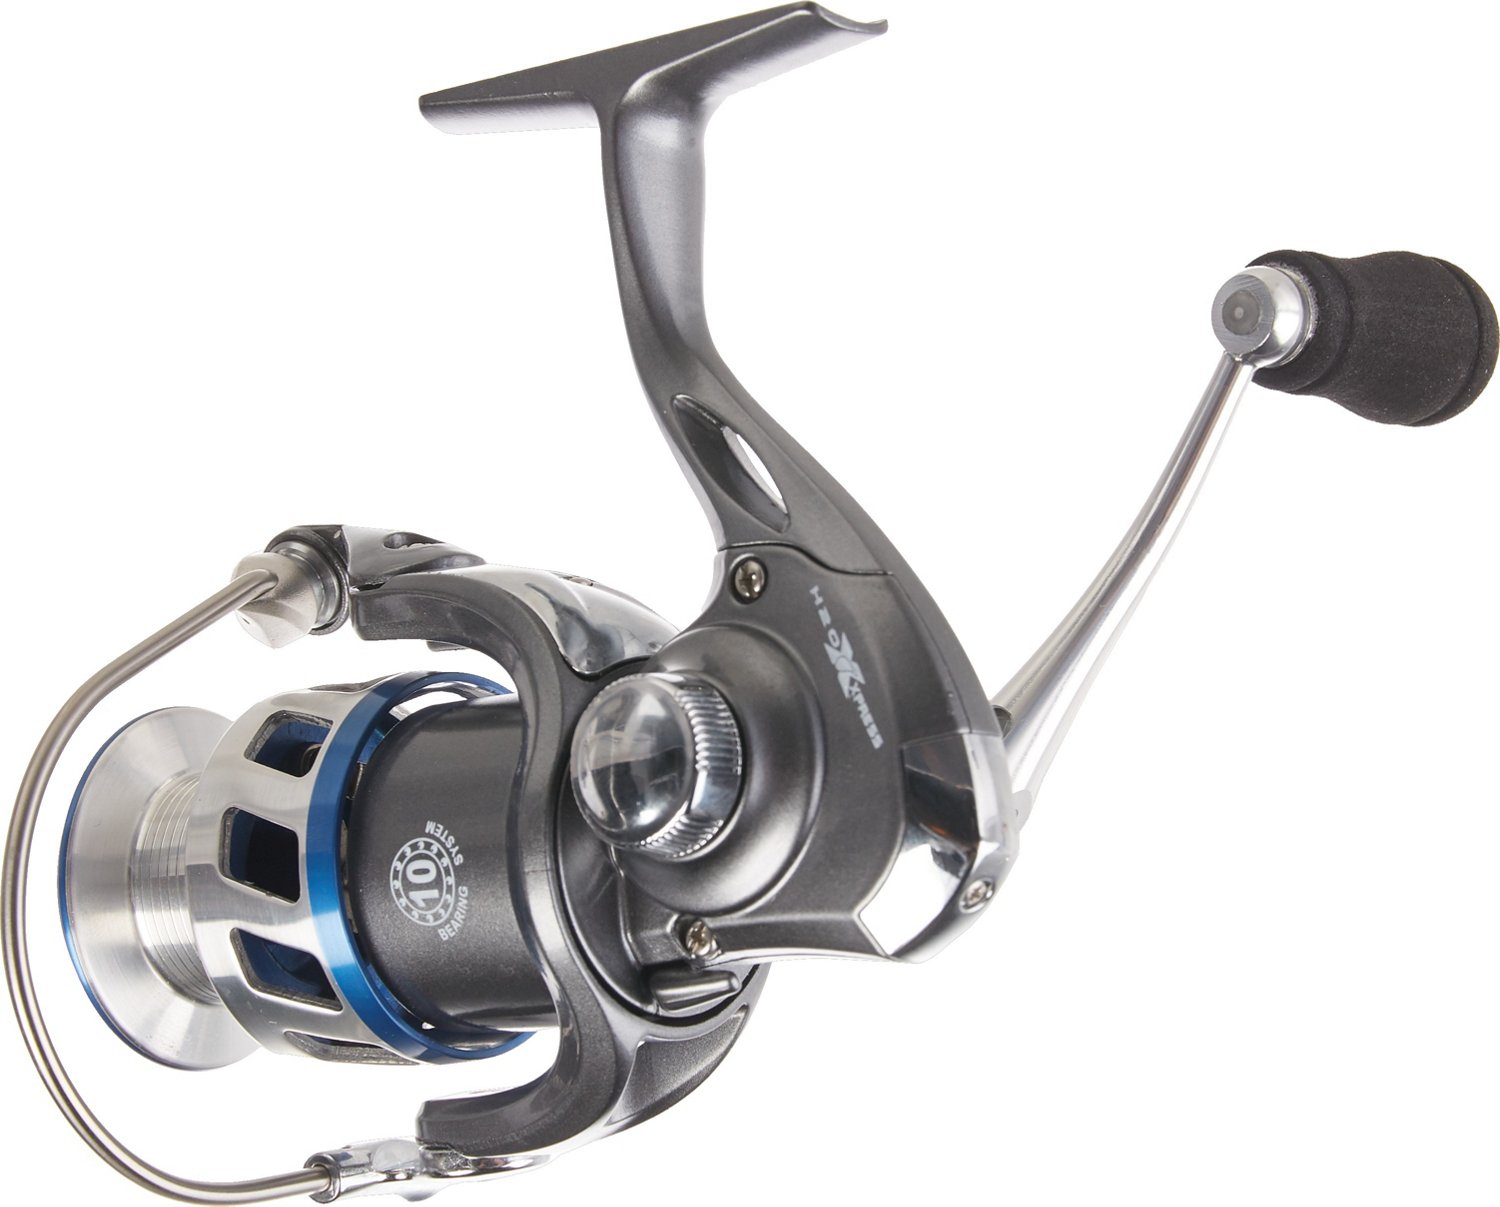 H2O XPRESS Mettle Spinning Reel